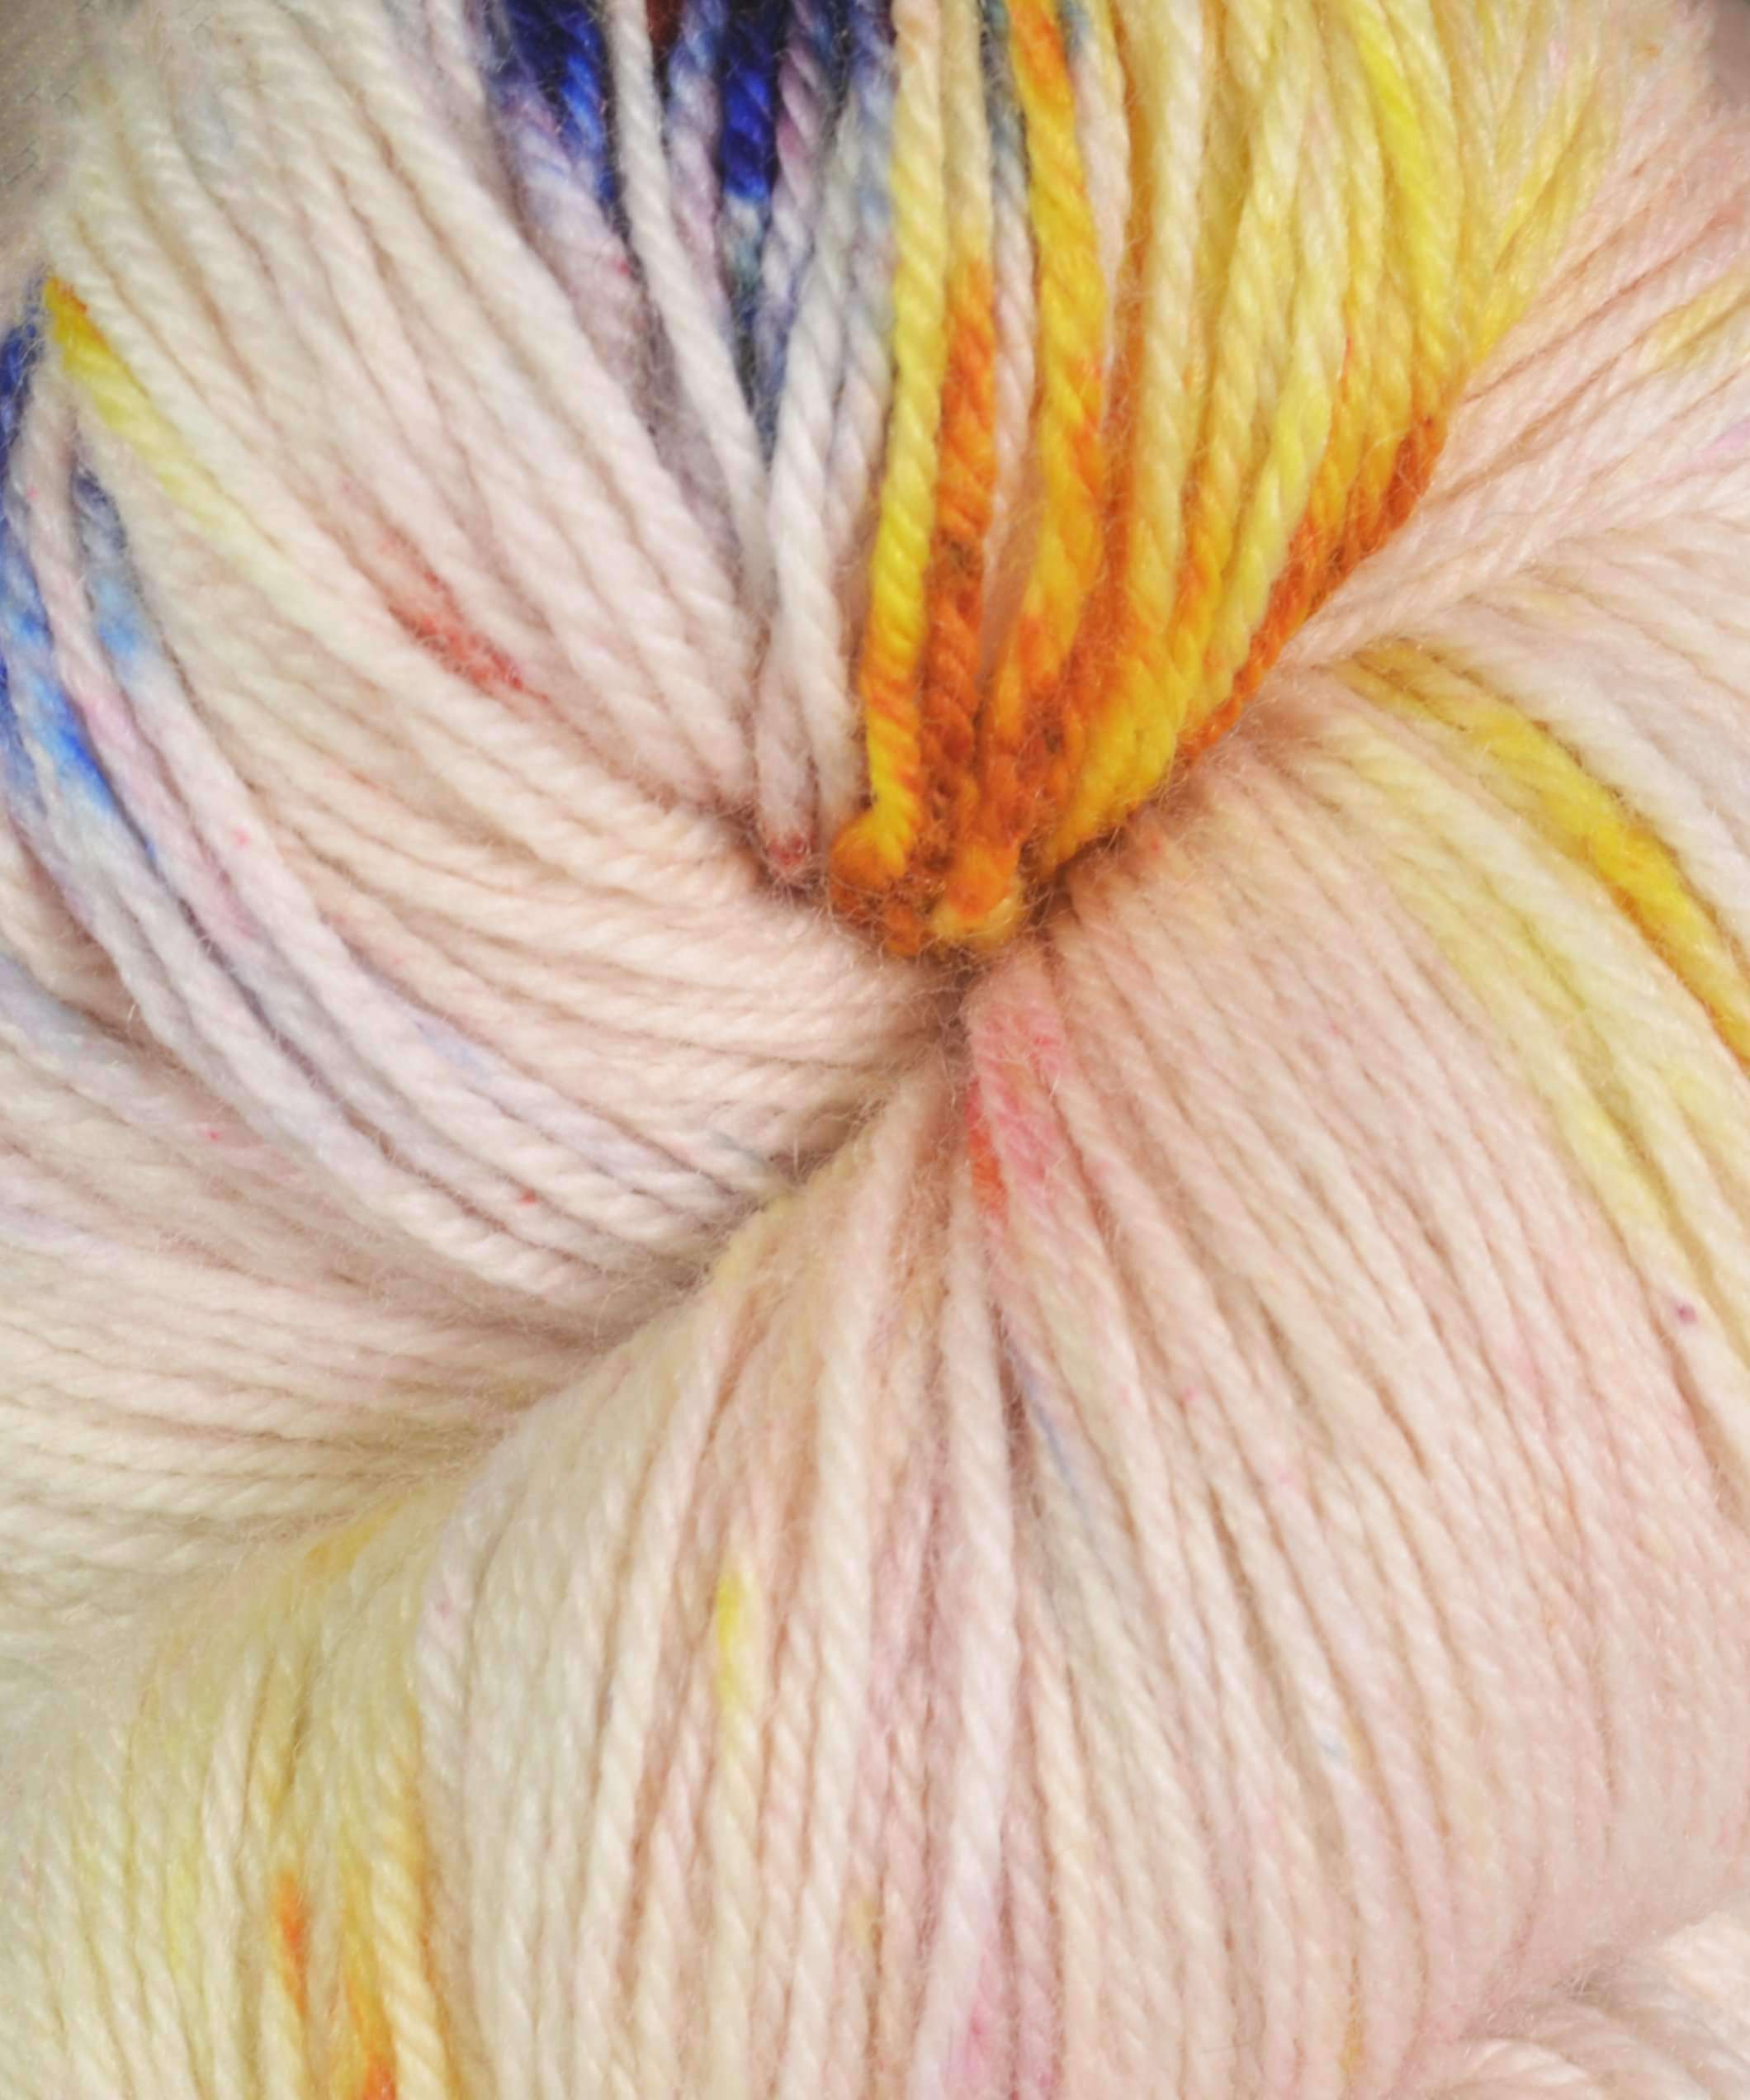 Yarn and Colors Zen 001 White